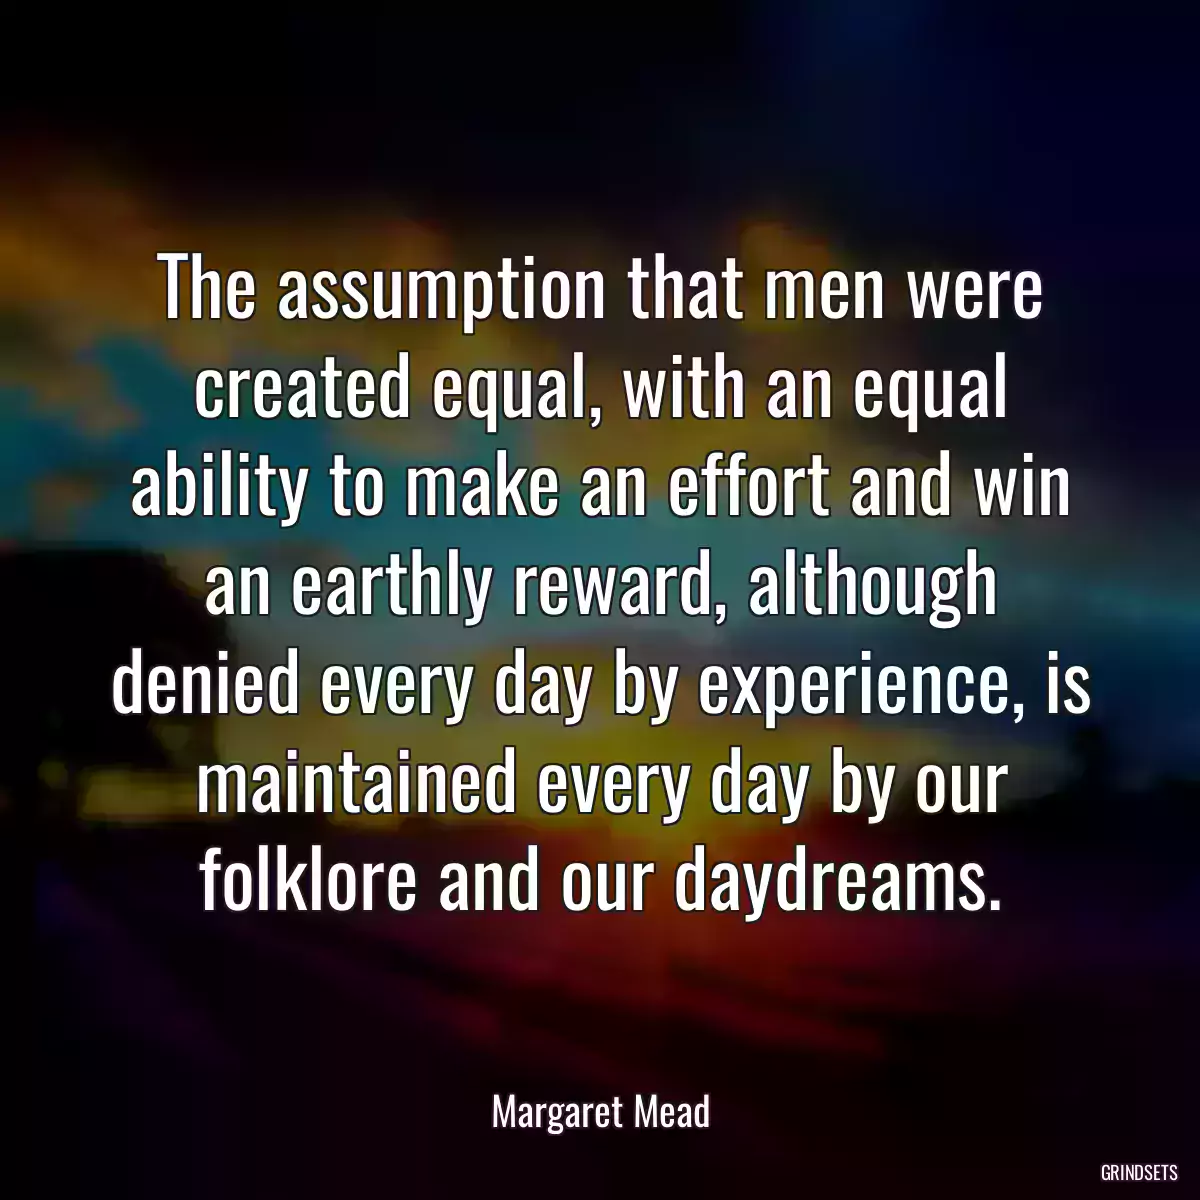 The assumption that men were created equal, with an equal ability to make an effort and win an earthly reward, although denied every day by experience, is maintained every day by our folklore and our daydreams.